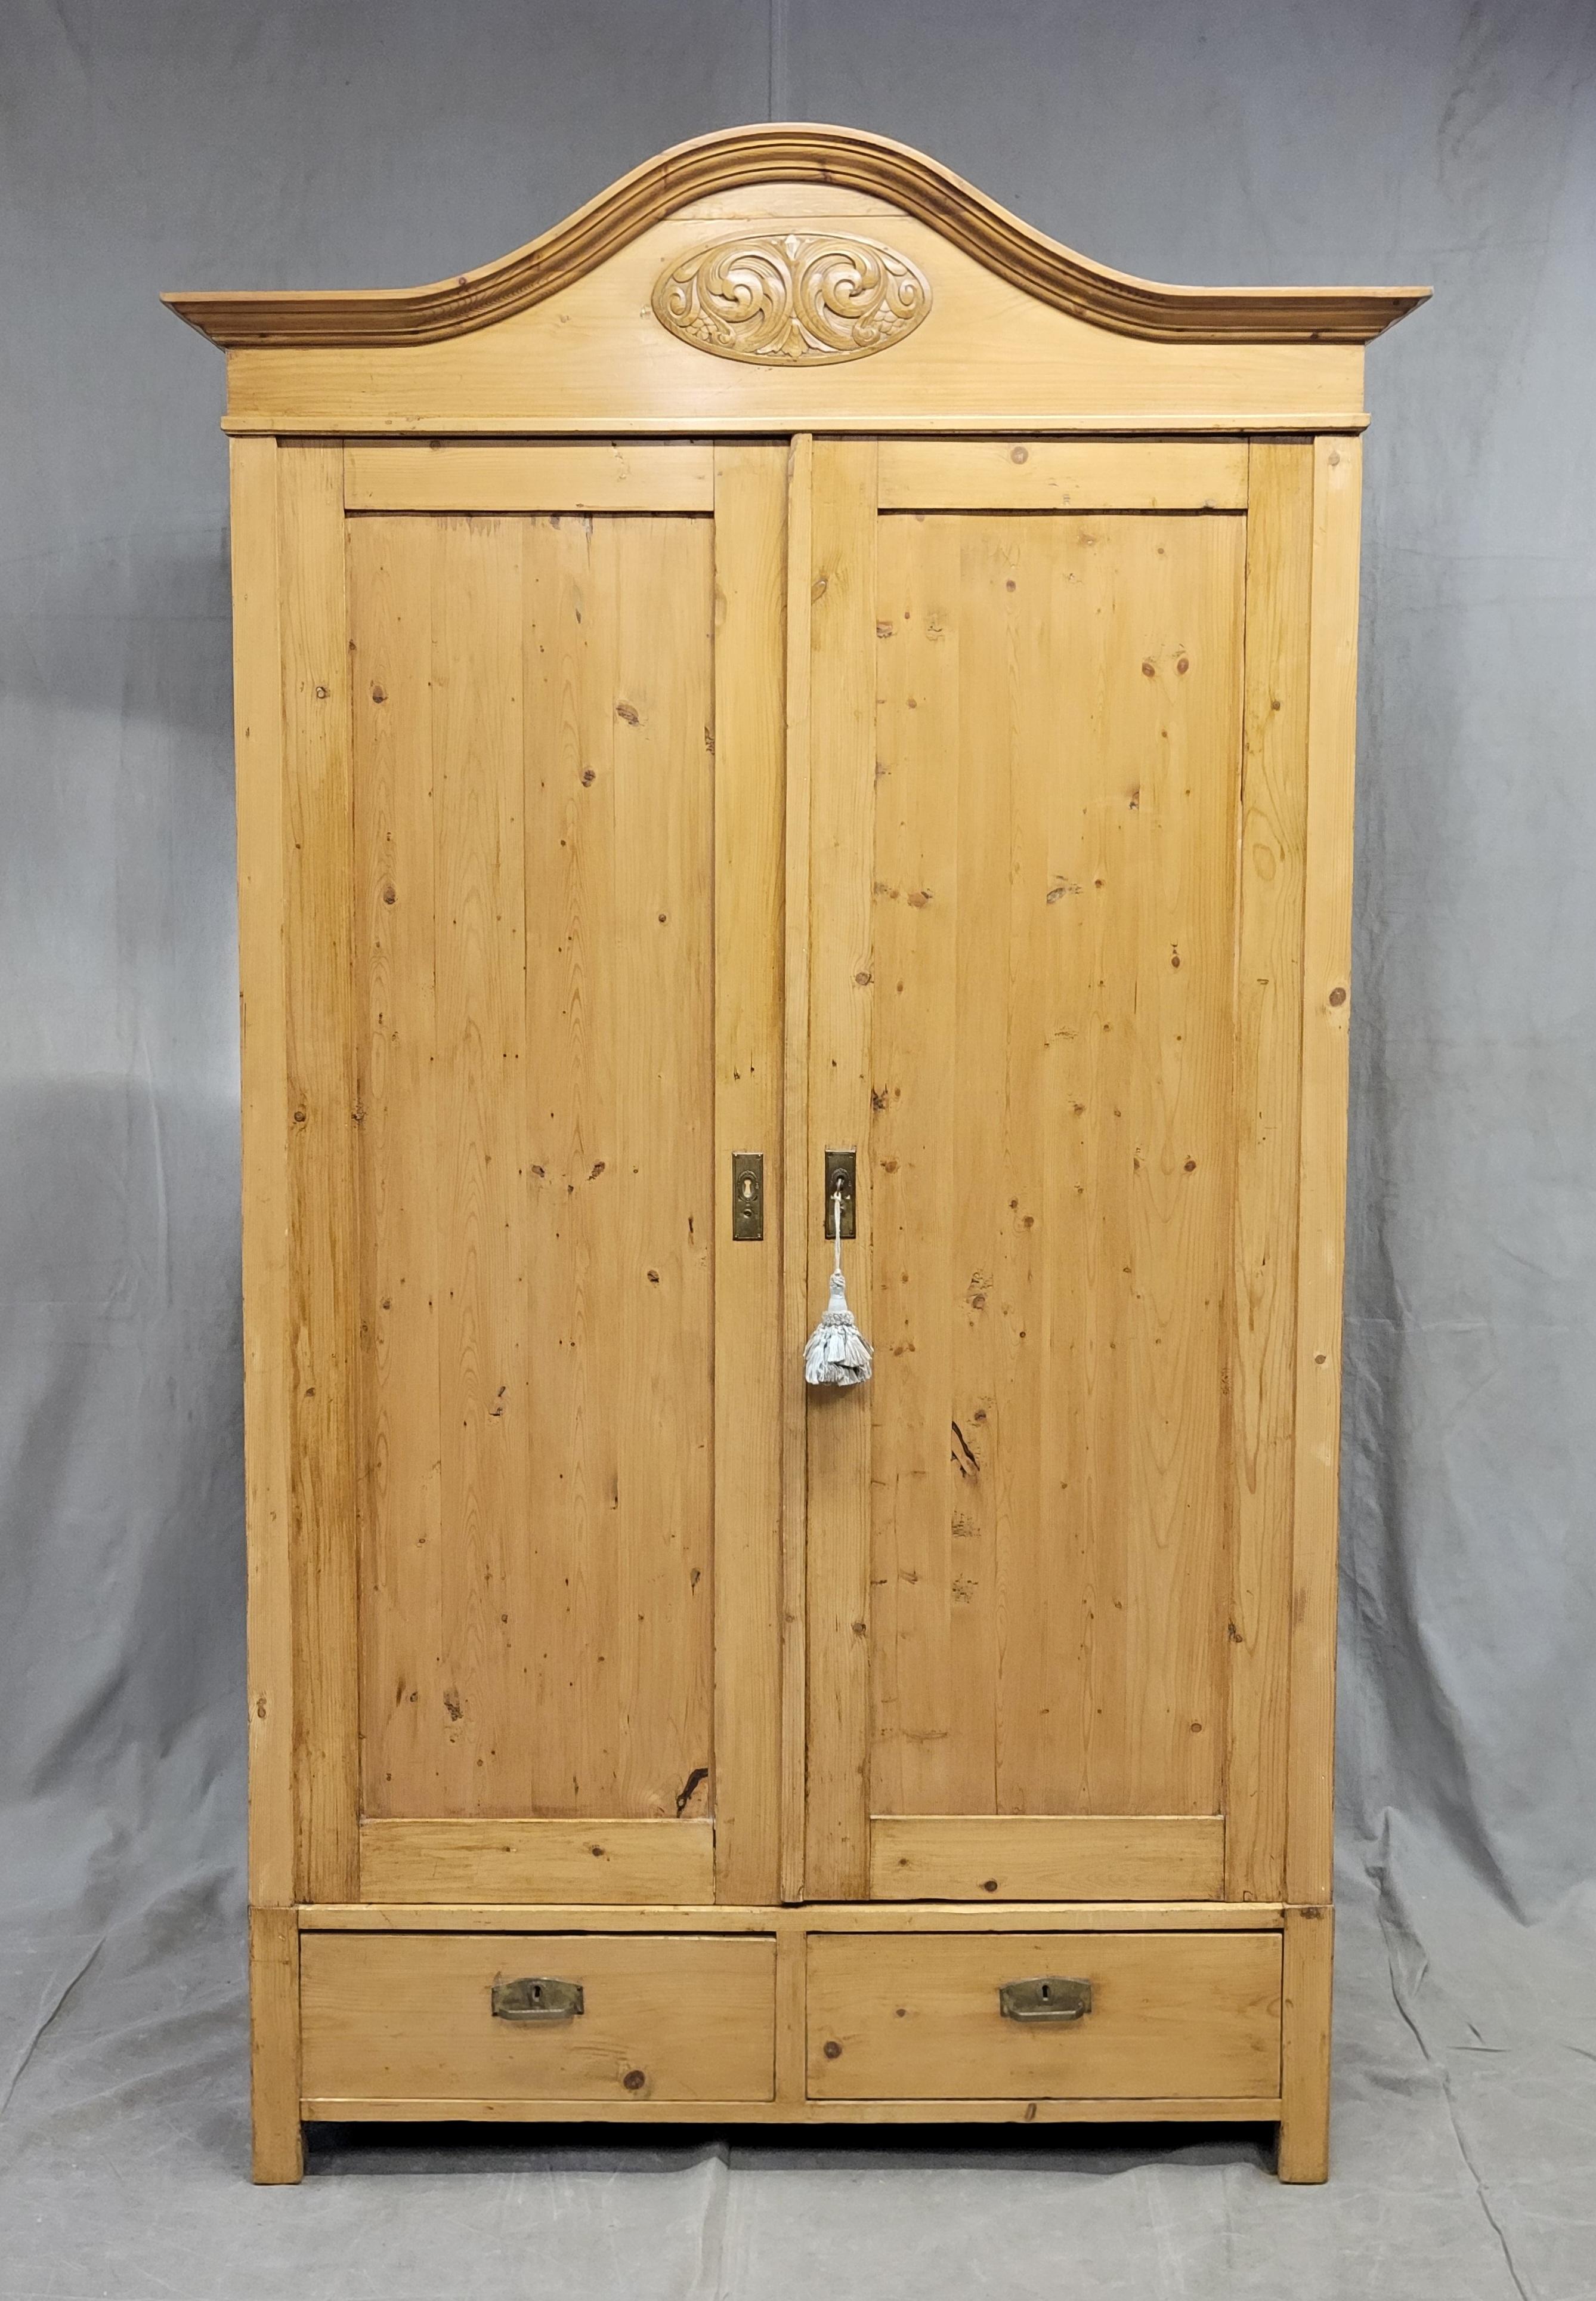 A beautiful antique early 1900s Swedish waxed pine divided armoire with six shelves and two drawers. Original brass hardware with working key that locks the doors. A beautiful and functional antique piece that offers a large amount of